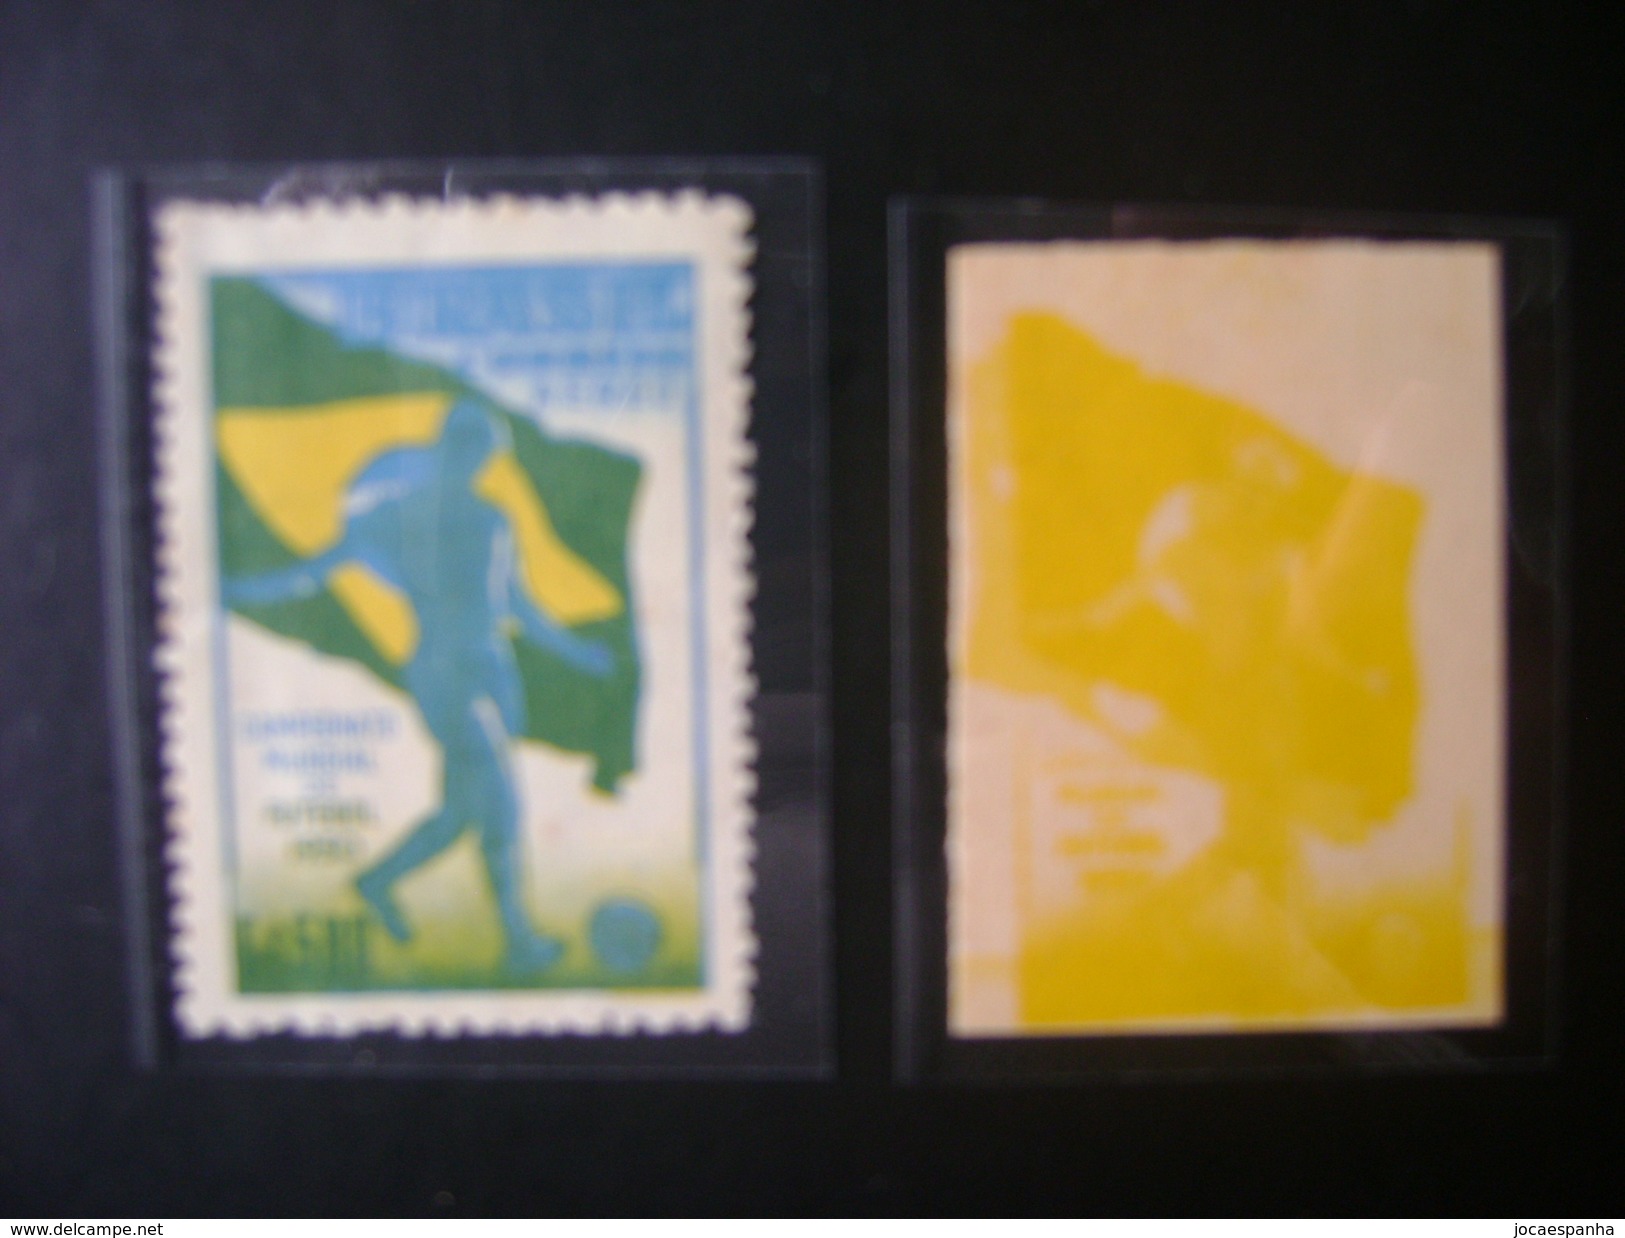 WORLD CUP OF FOOTBALL IN BRAZIL 1950 - A-76, PROOF YELLOW COLOR WITH DISPLACEMENT IN THE STATE - 1950 – Brazil